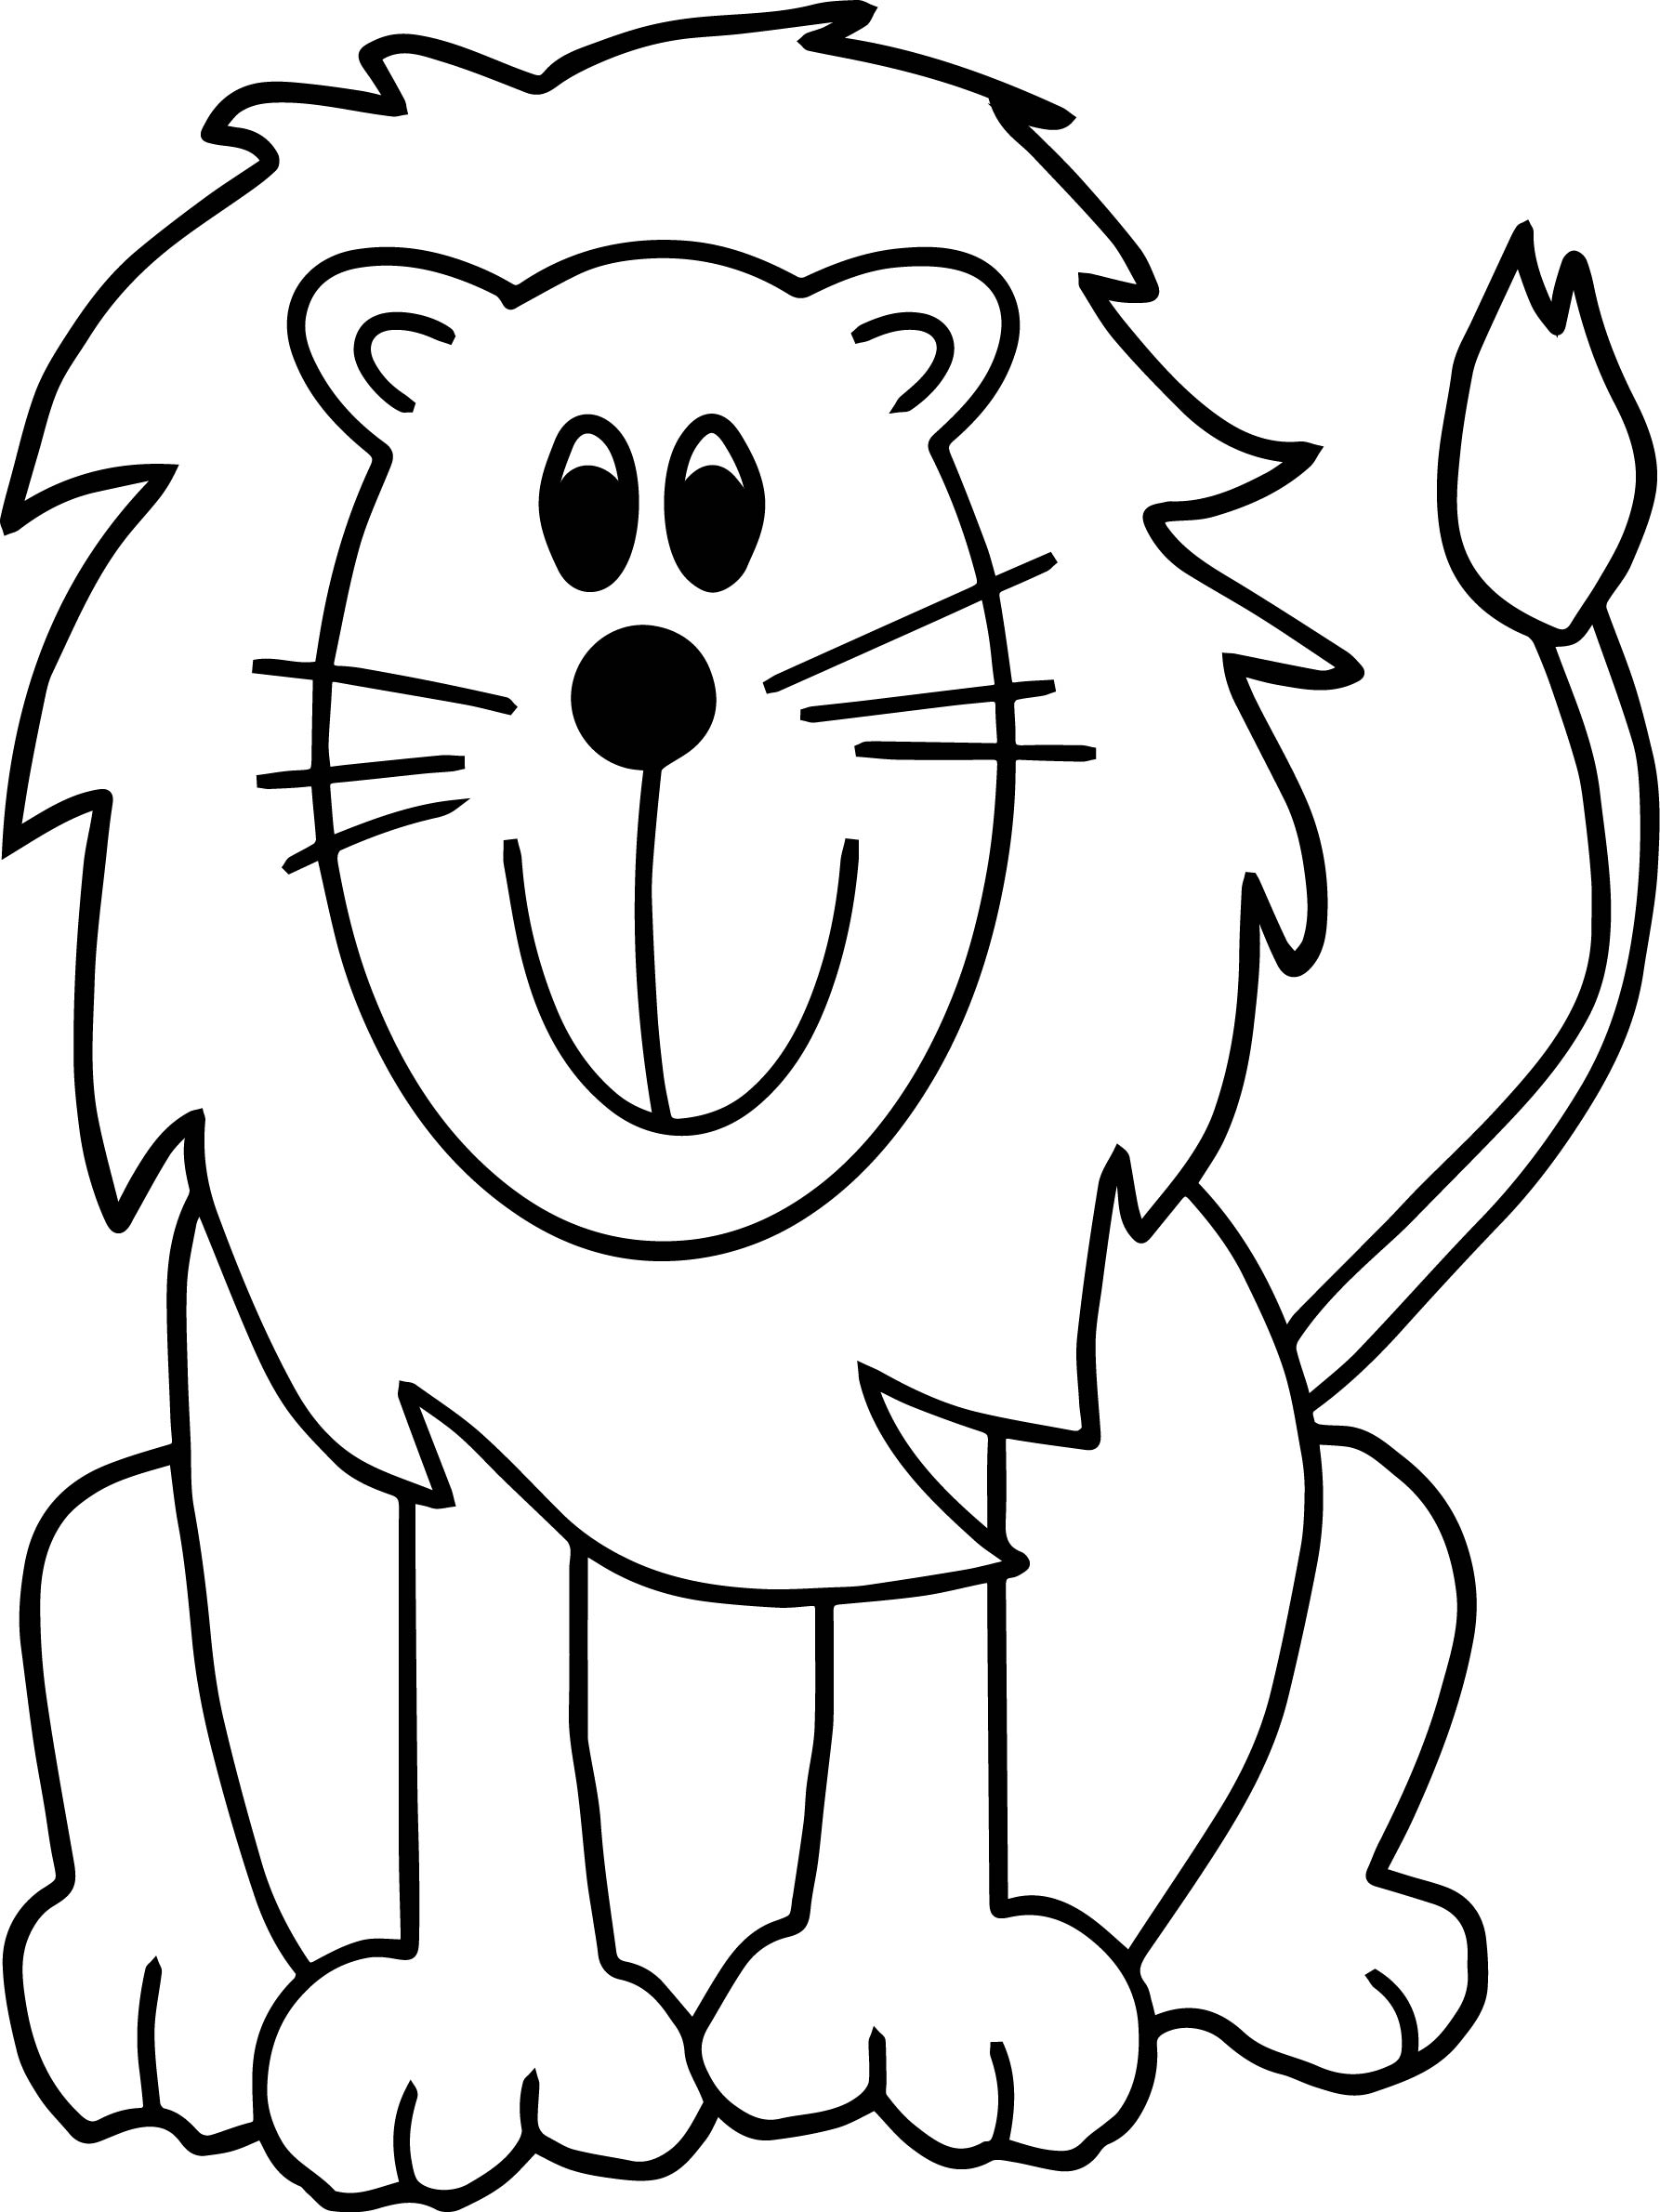 coloring-pages-zootopia-free-download-on-clipartmag